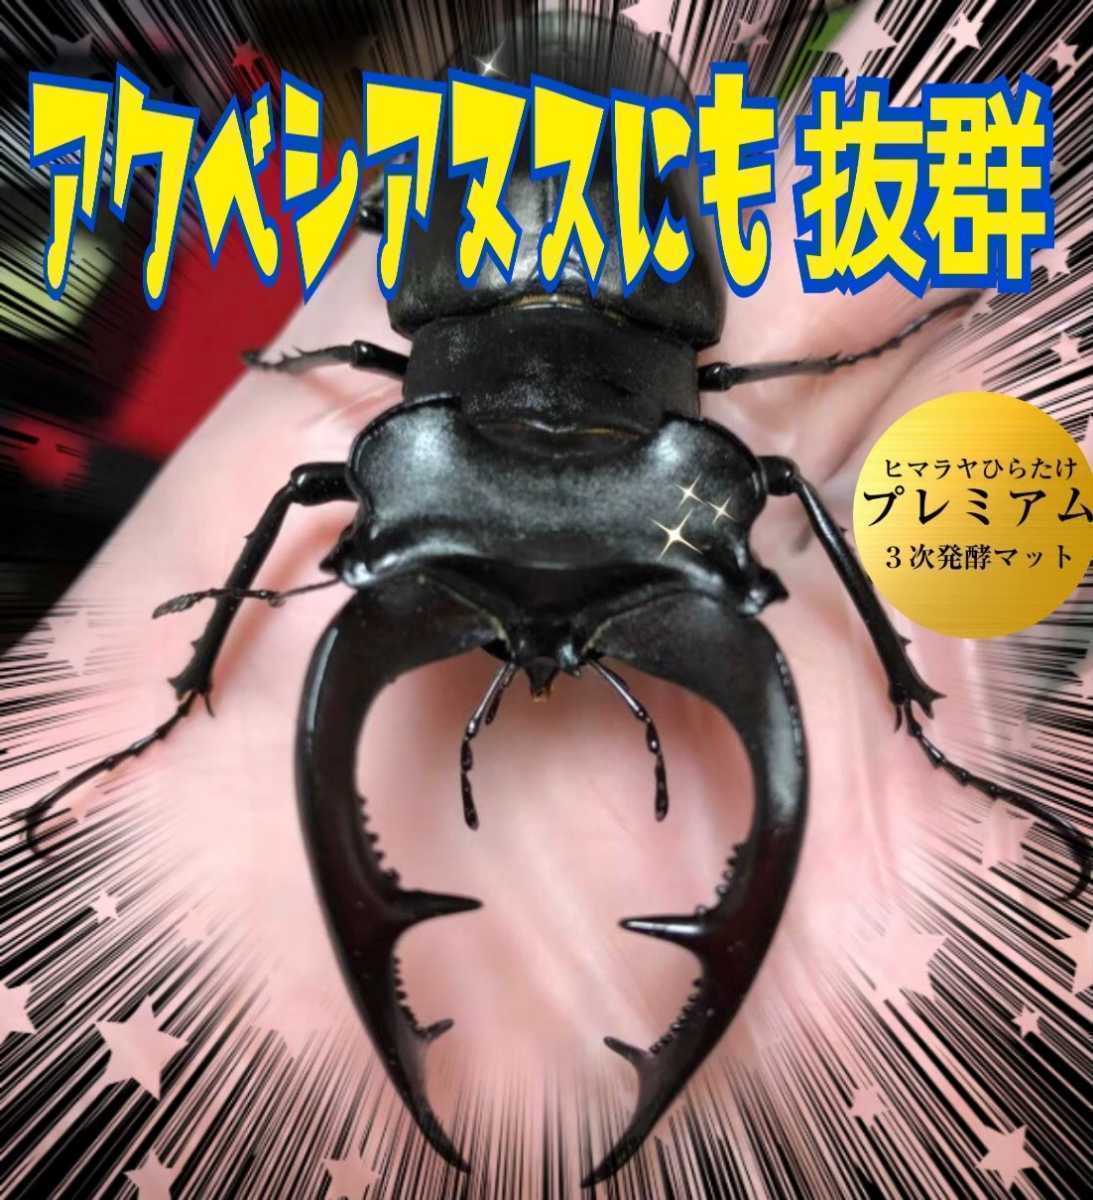  Miyama, saw ....! stag beetle larva . inserting only! convenience! clear bottle entering premium departure . mat [6ps.@]tore Hello s* chitosan combination 